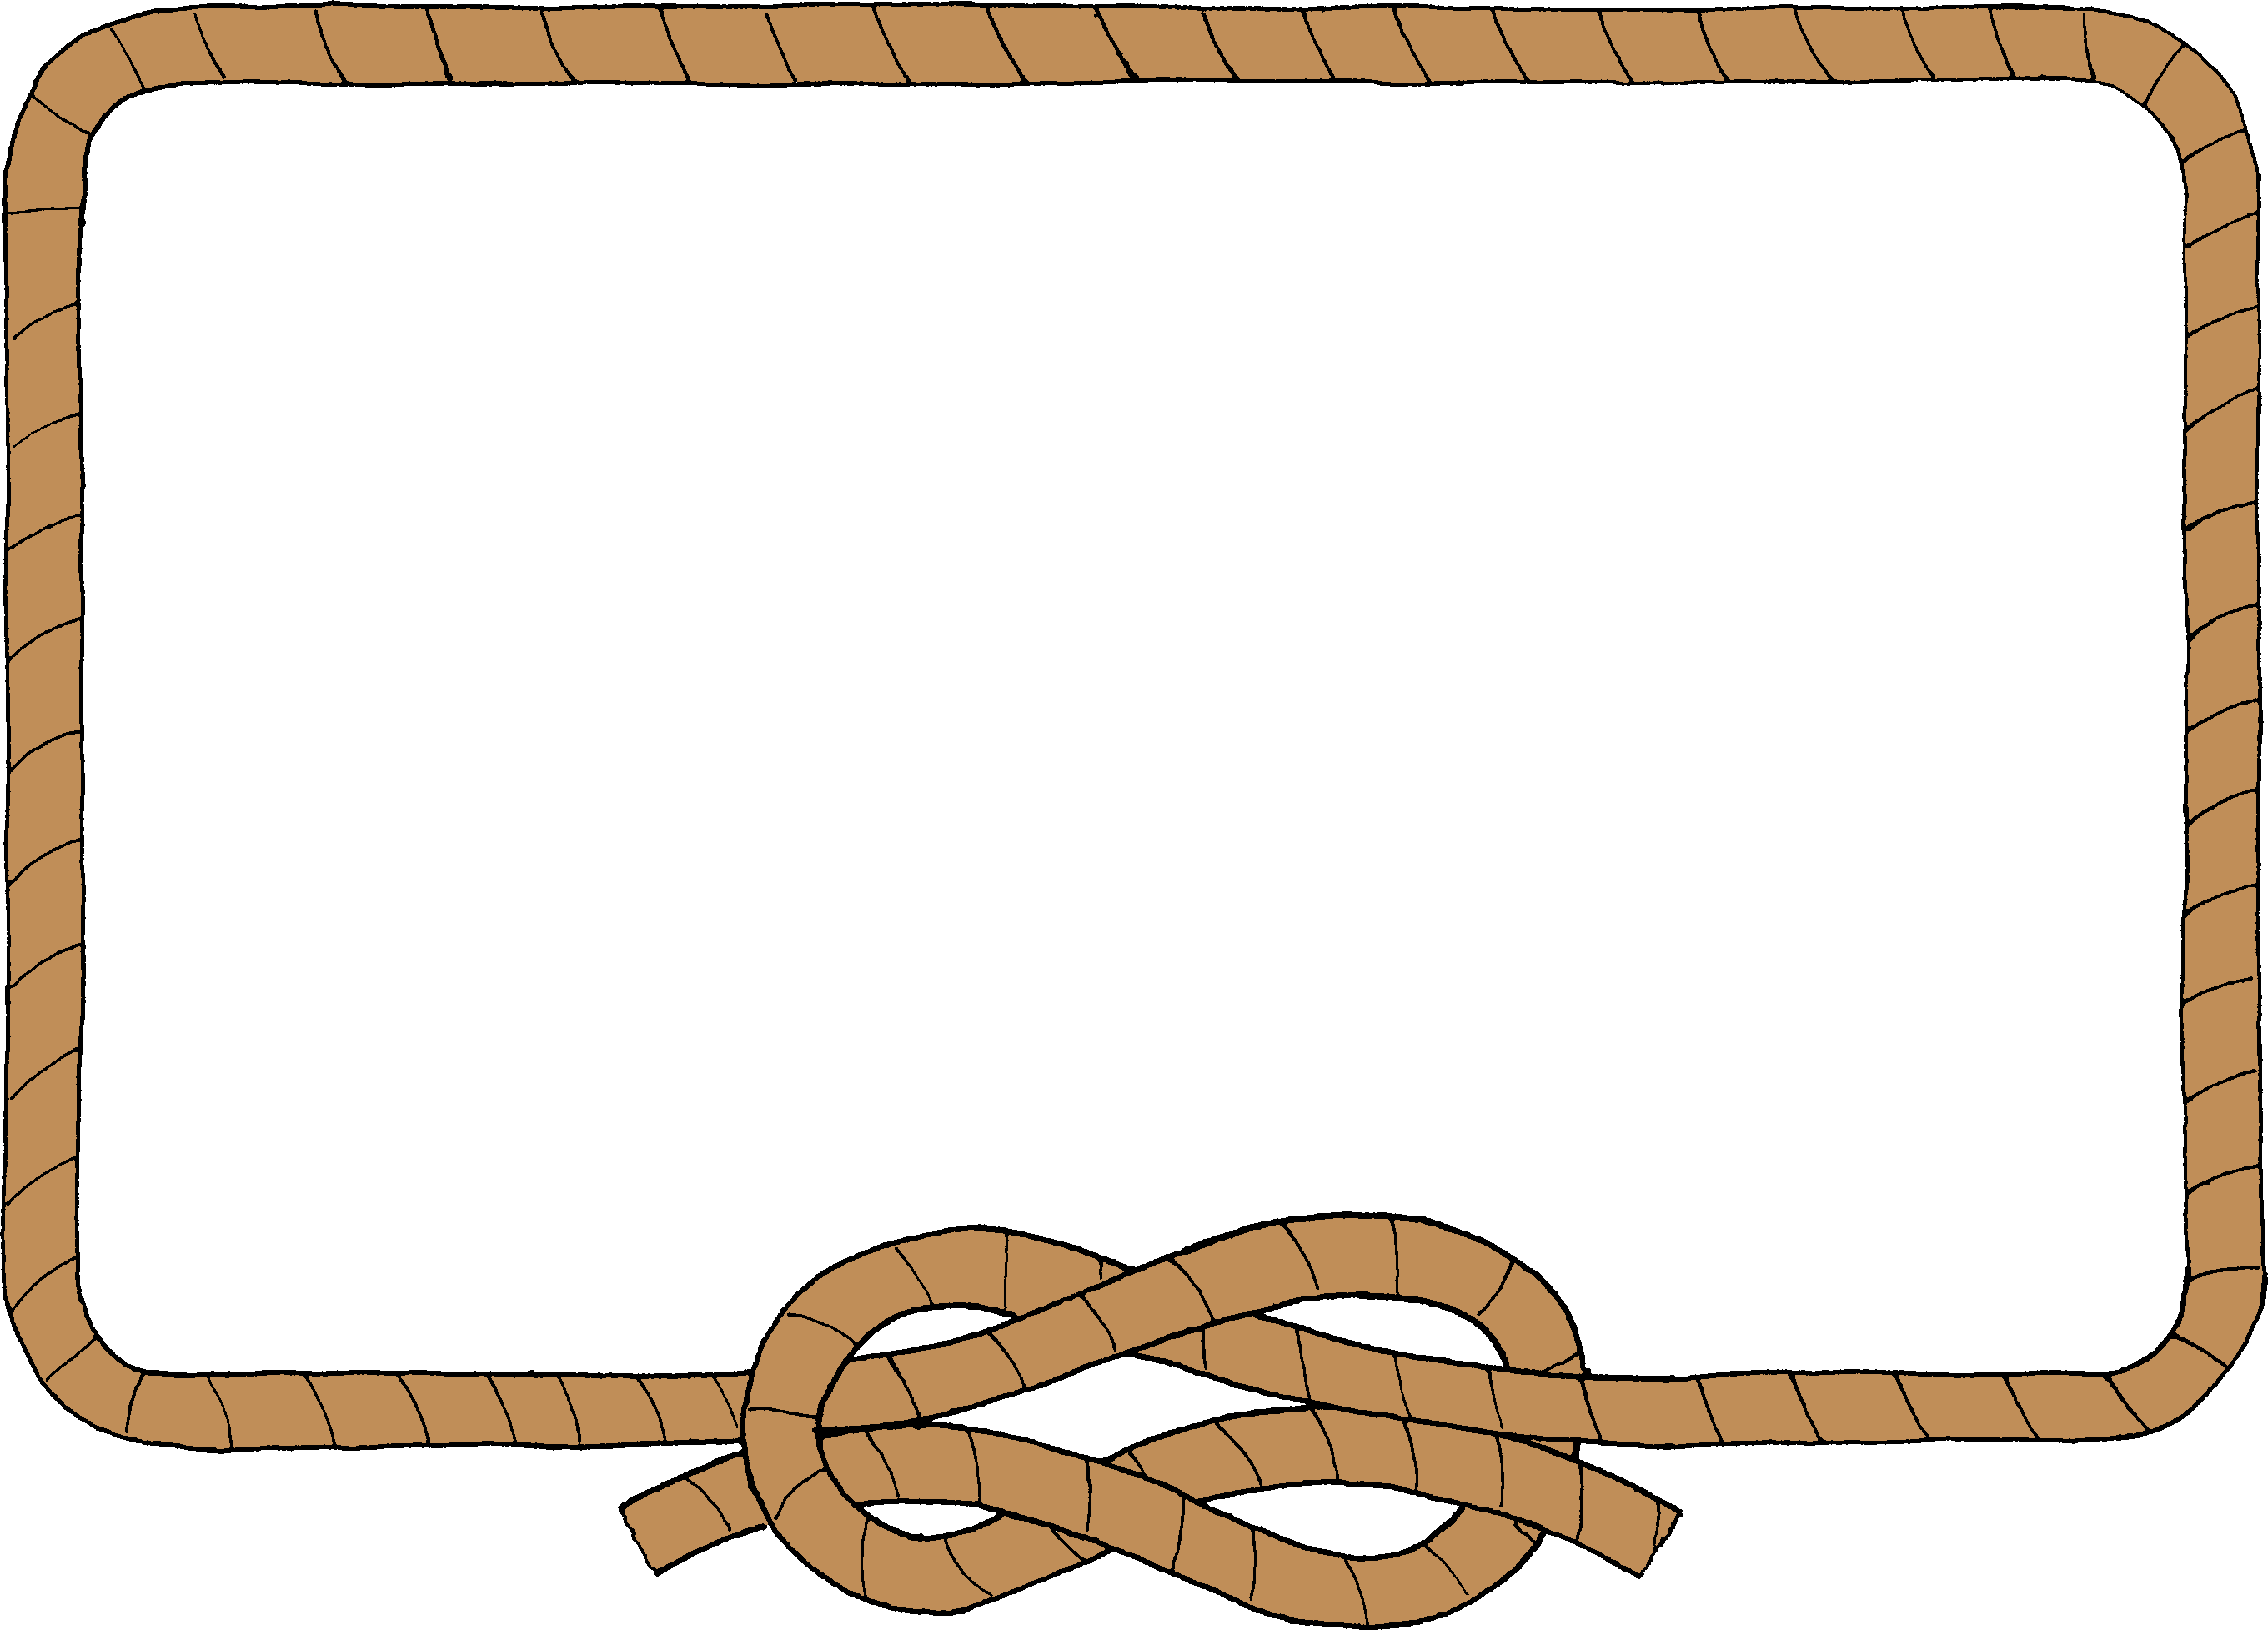 rope clipart free download - photo #44